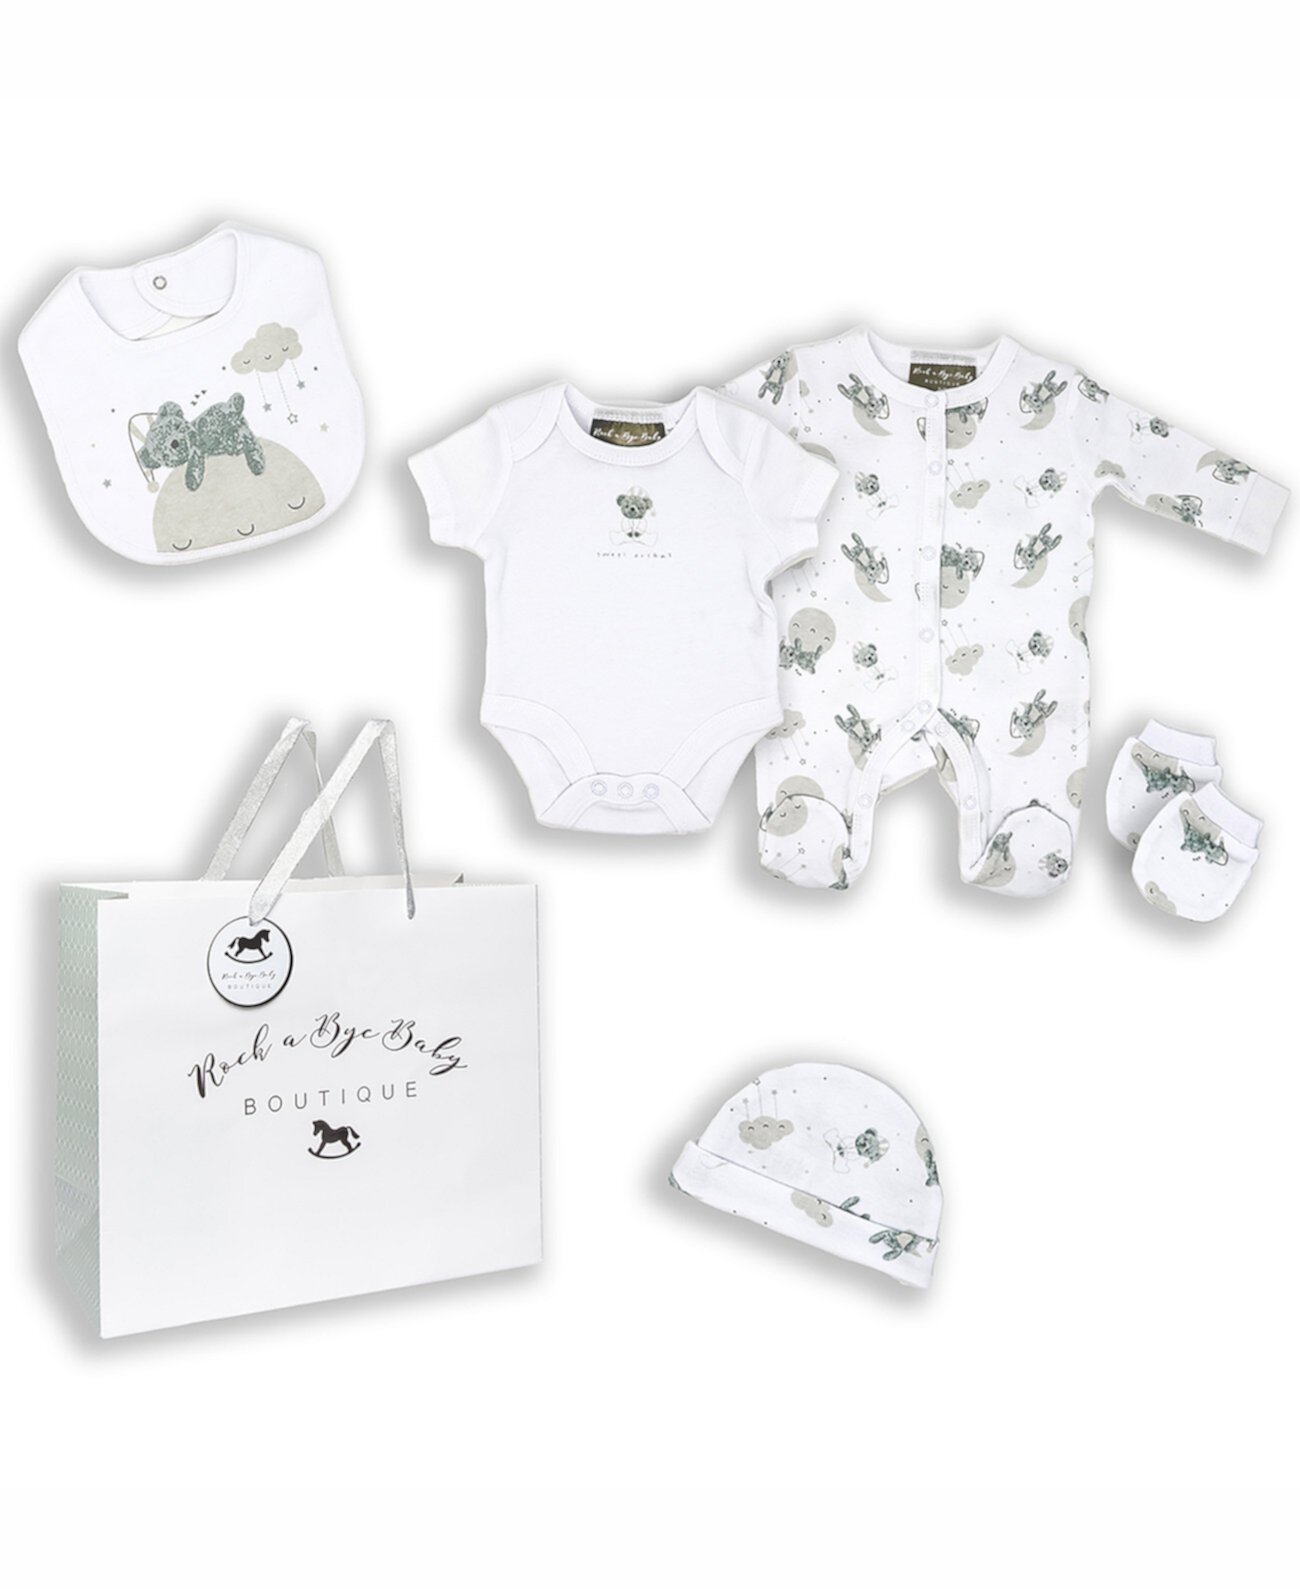 Baby Boys and Girls Sweet Dreams Bear Layette Gift в сетчатом мешочке, набор из 5 предметов Rock-A-Bye Baby Boutique